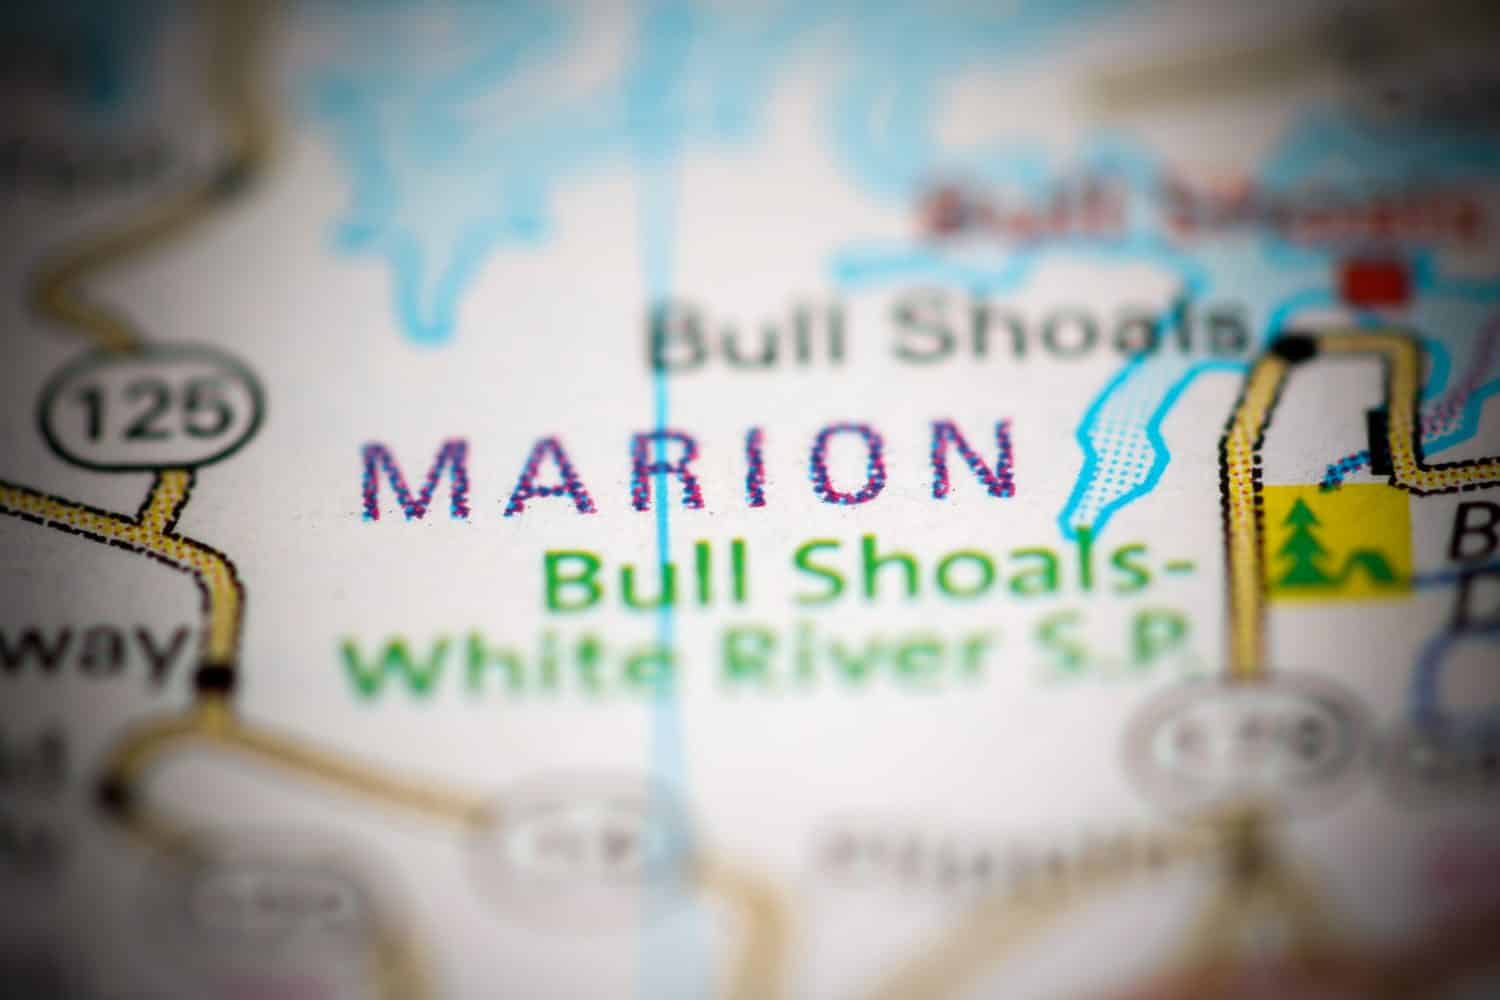 Marion. Arkansas. USA on a geography map